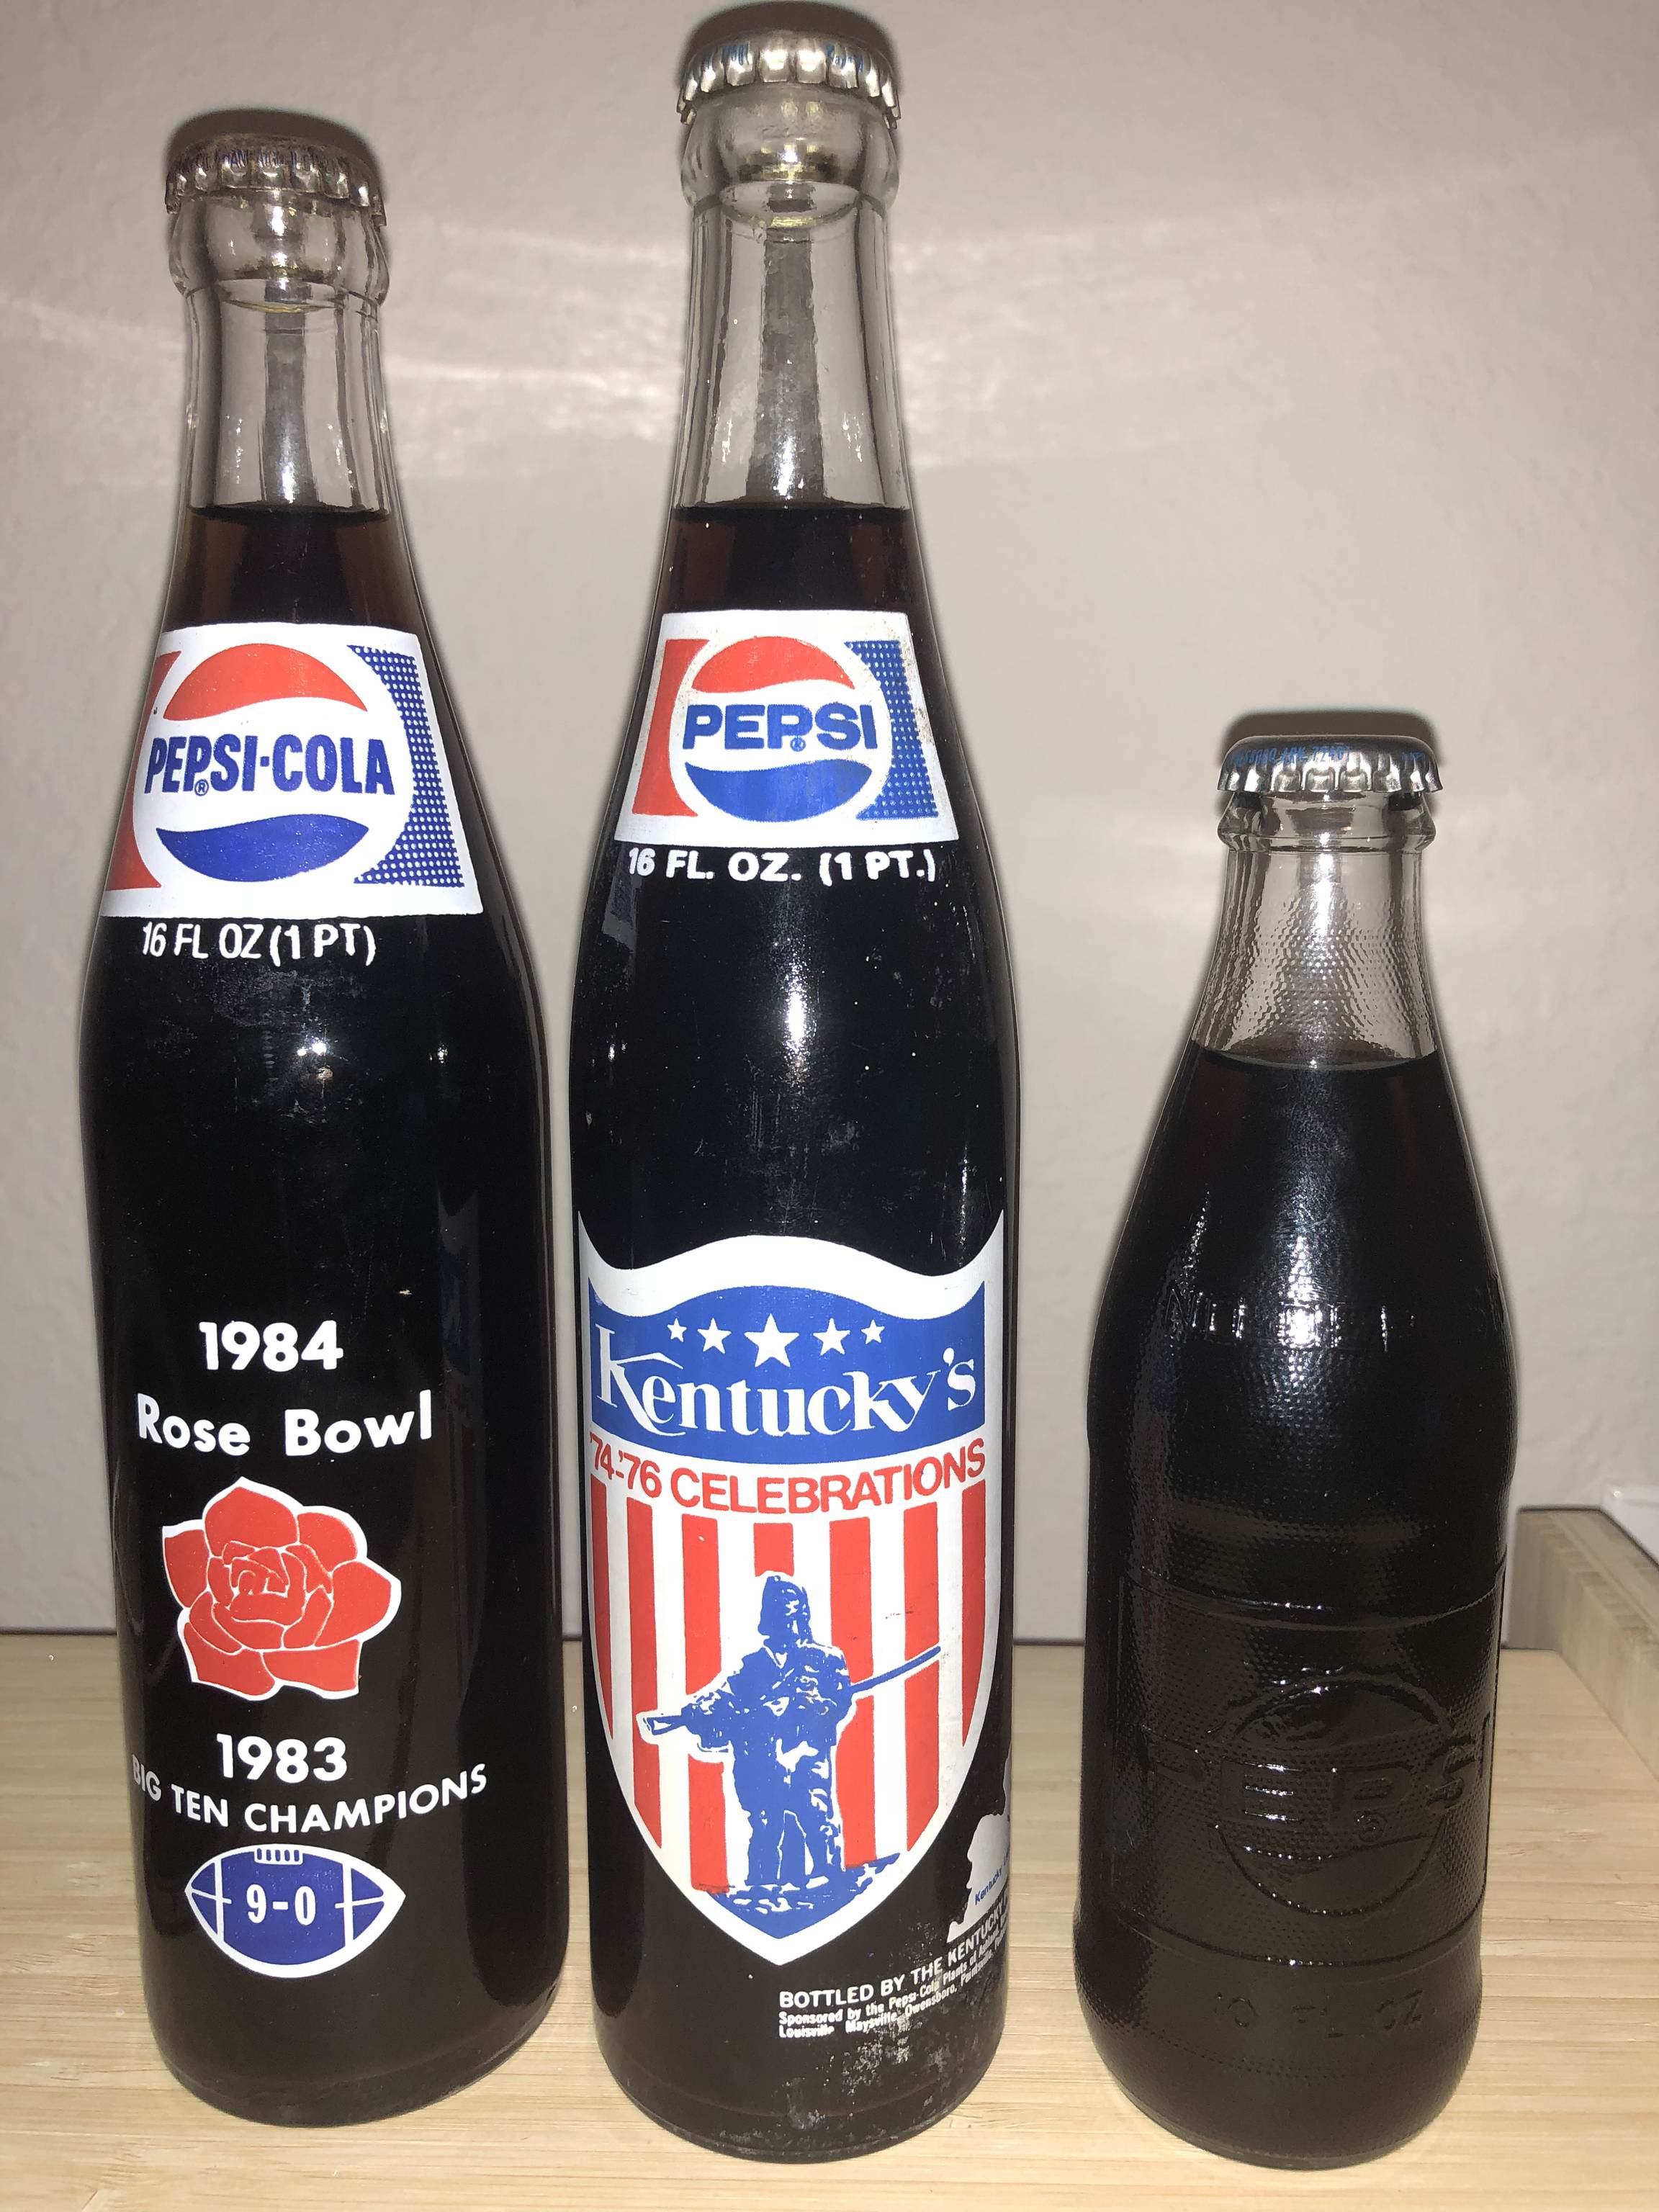 Vintage Pepsi Bottle Logo - Unopened vintage Pepsi bottles in my collection. From the 60s, 70s